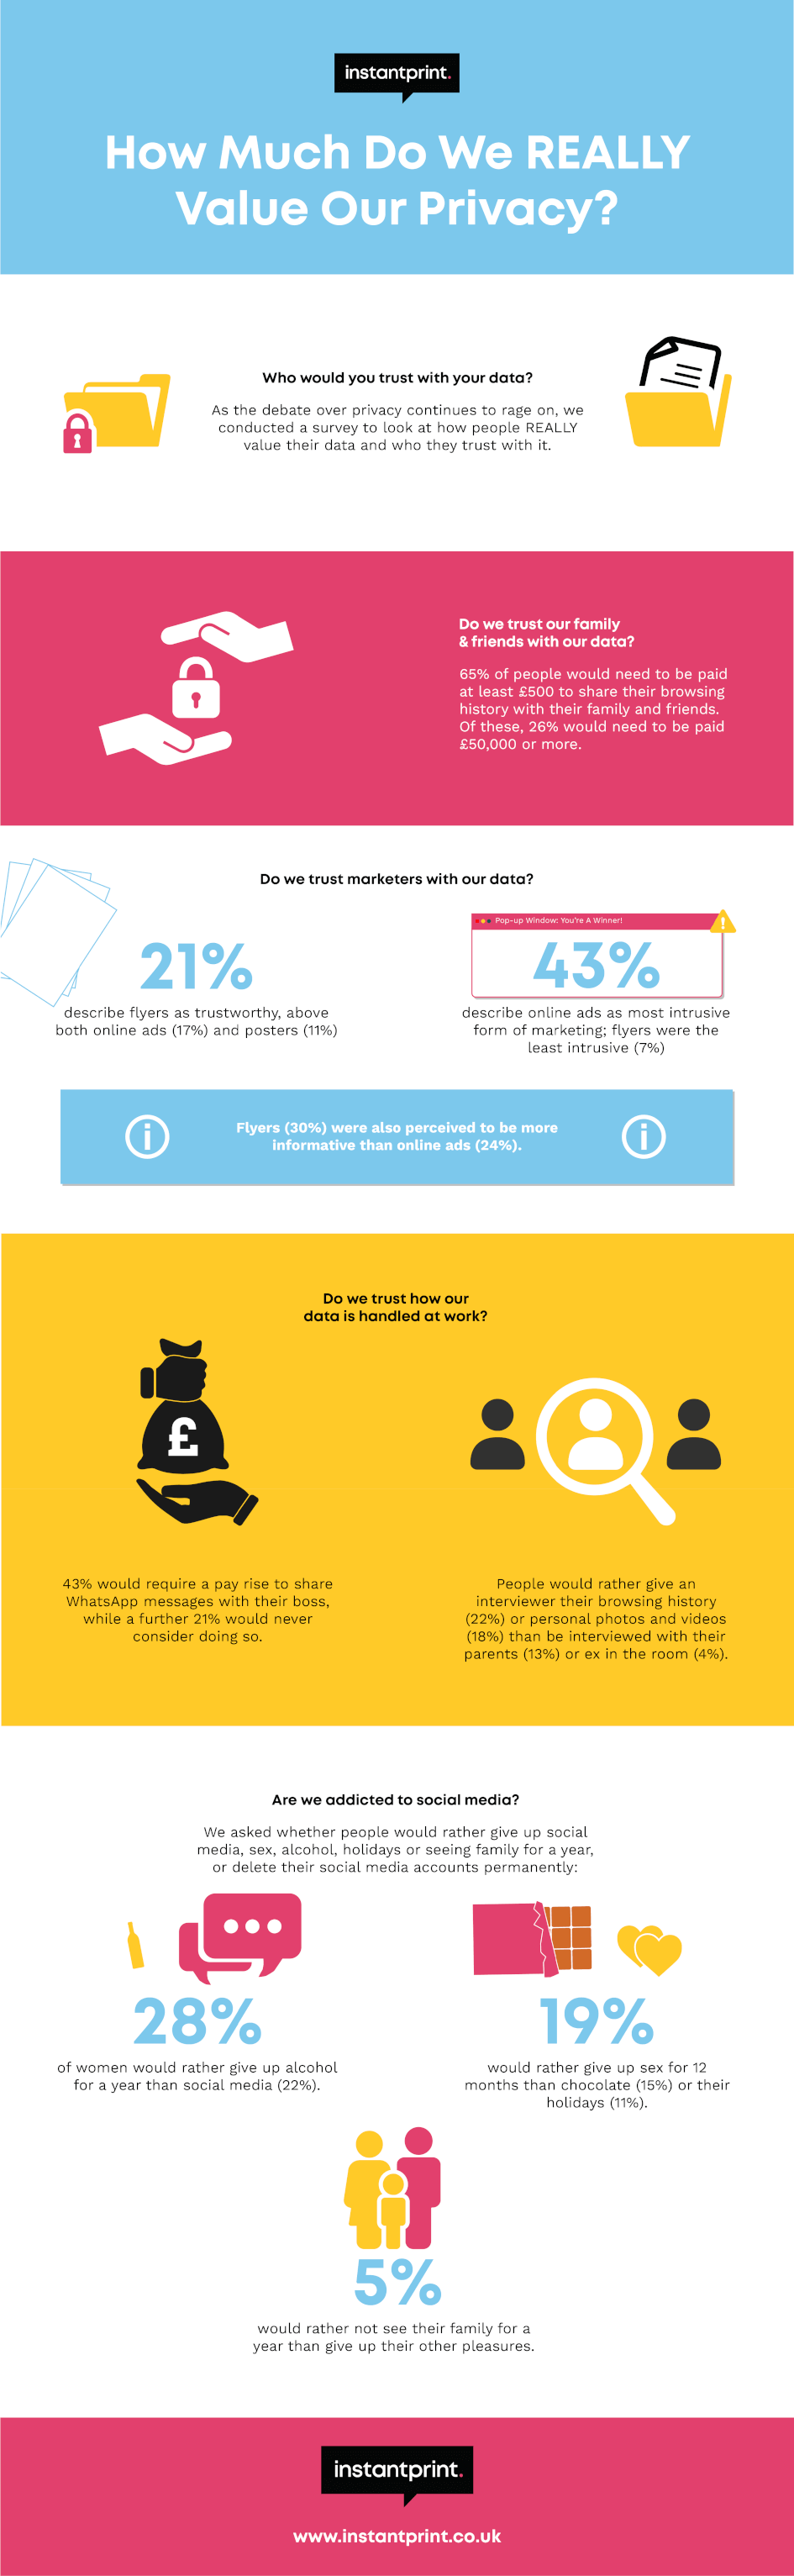 How much do we really value privacy - infographic